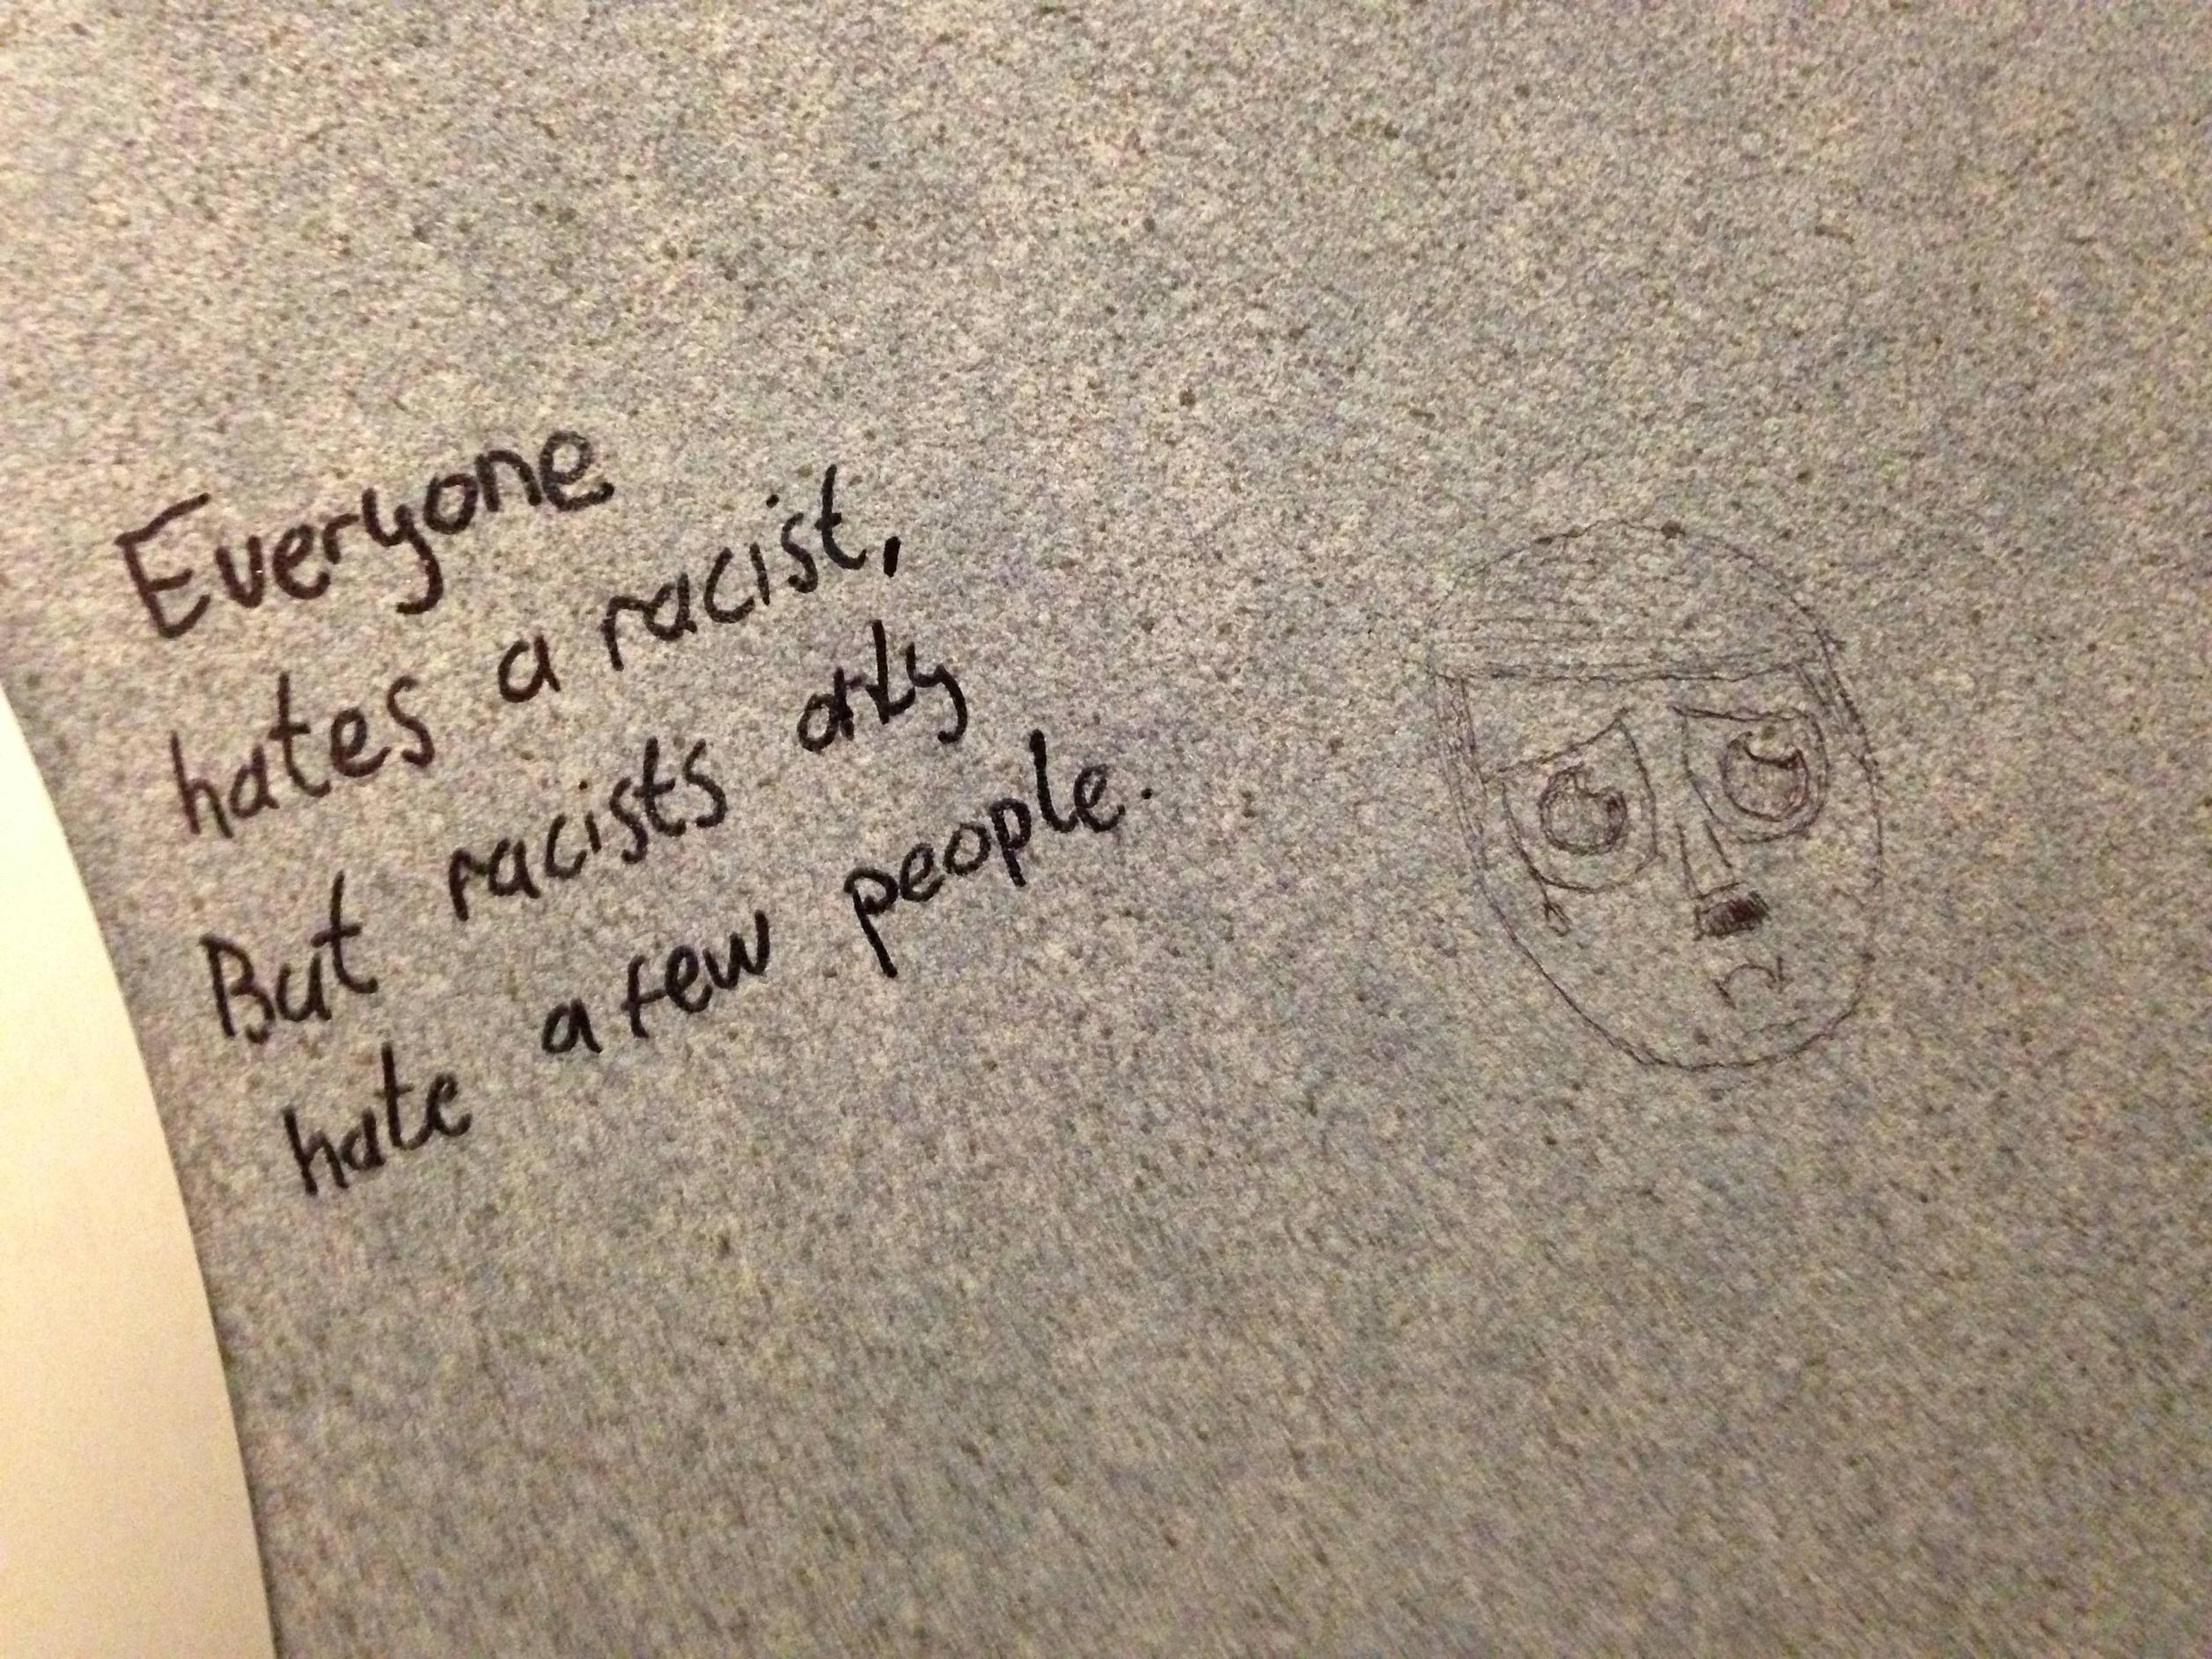 Wise words from the bathroom stall....